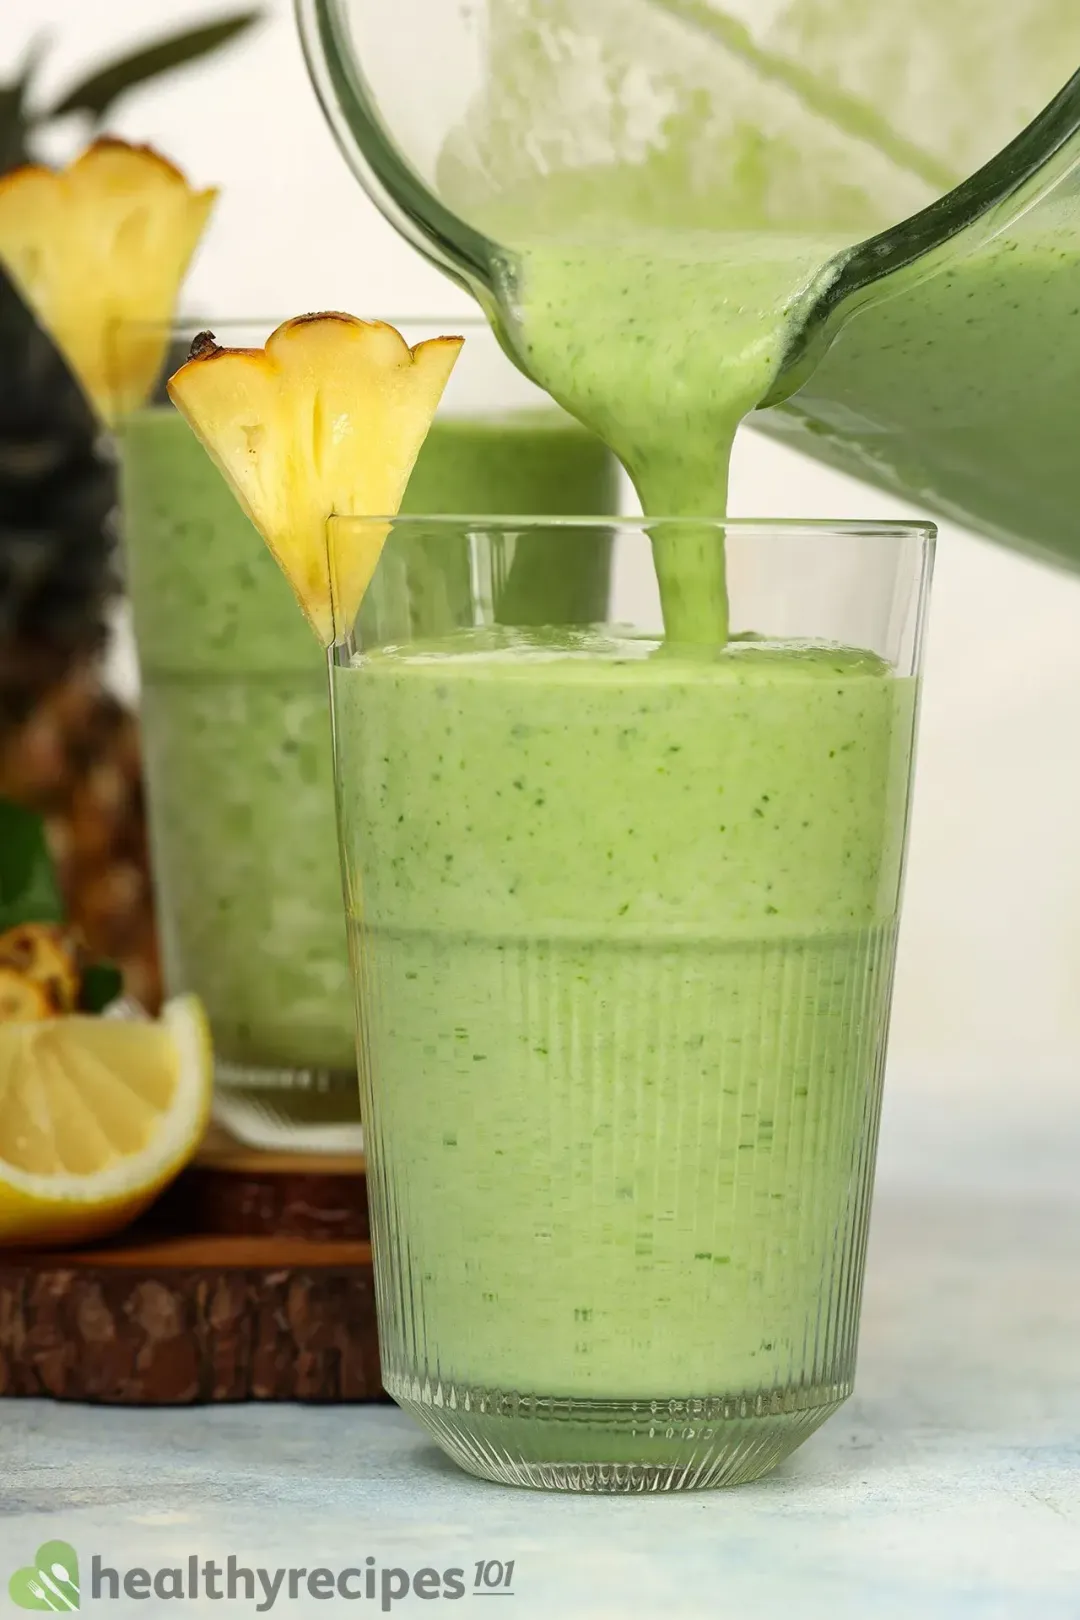 From a pitcher, a green smoothie poured into a glass, garnished with a triangular pineapple wedge